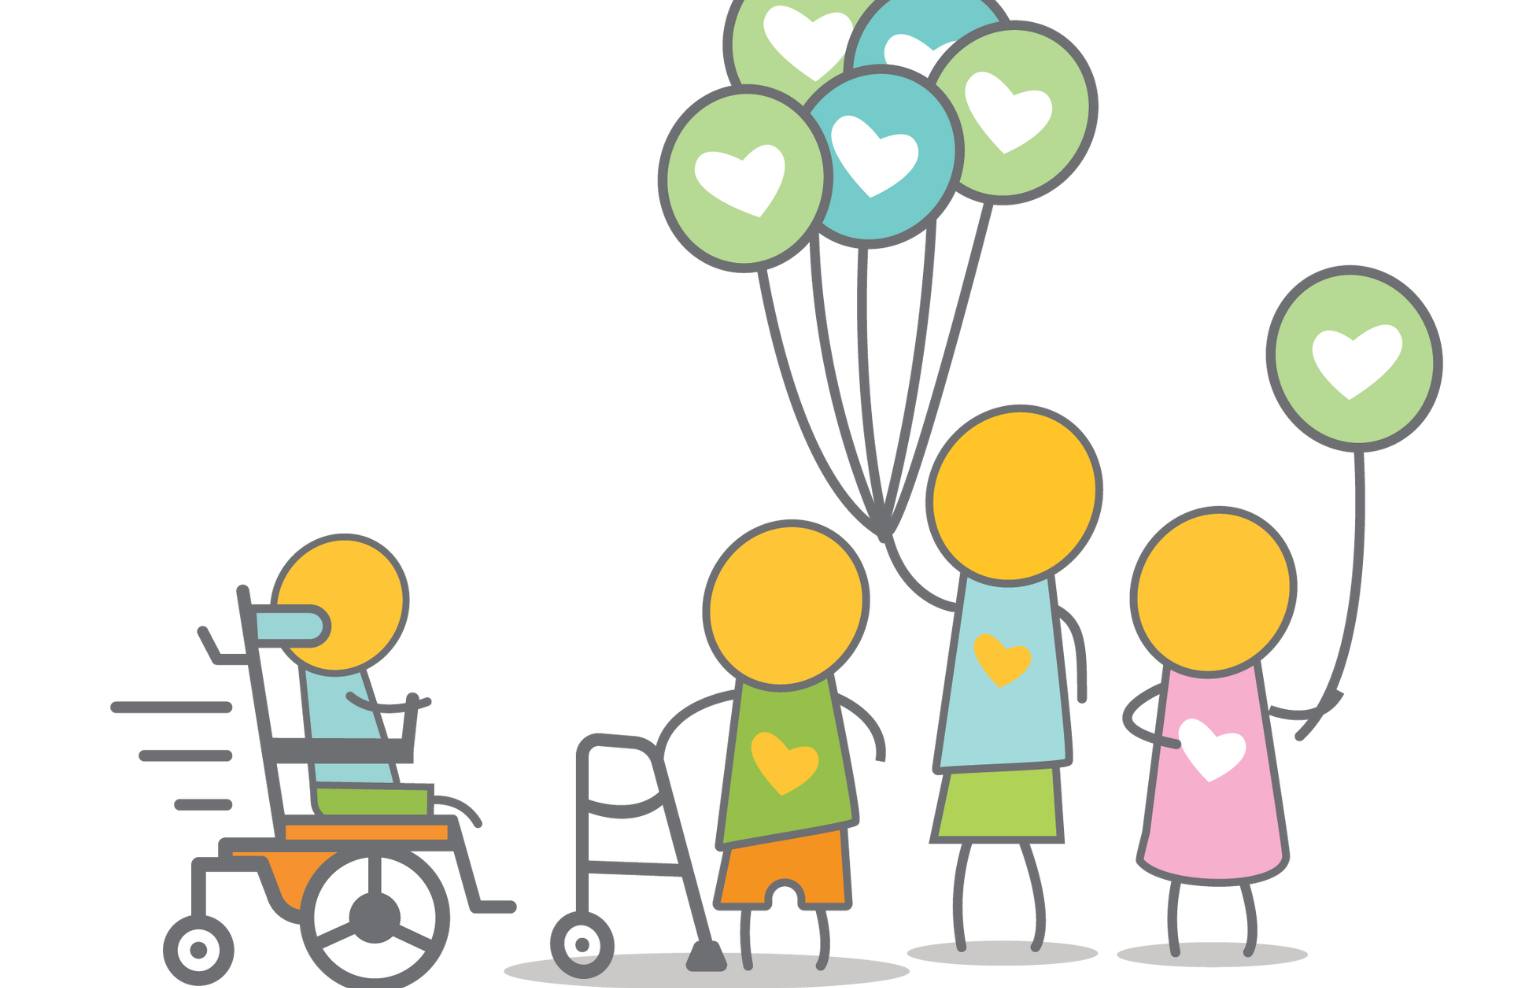 A community of humanoid emojis holding balloons with hearts in them. Image features three figures standing upright, one with a walker, and one seated in a wheelchair.